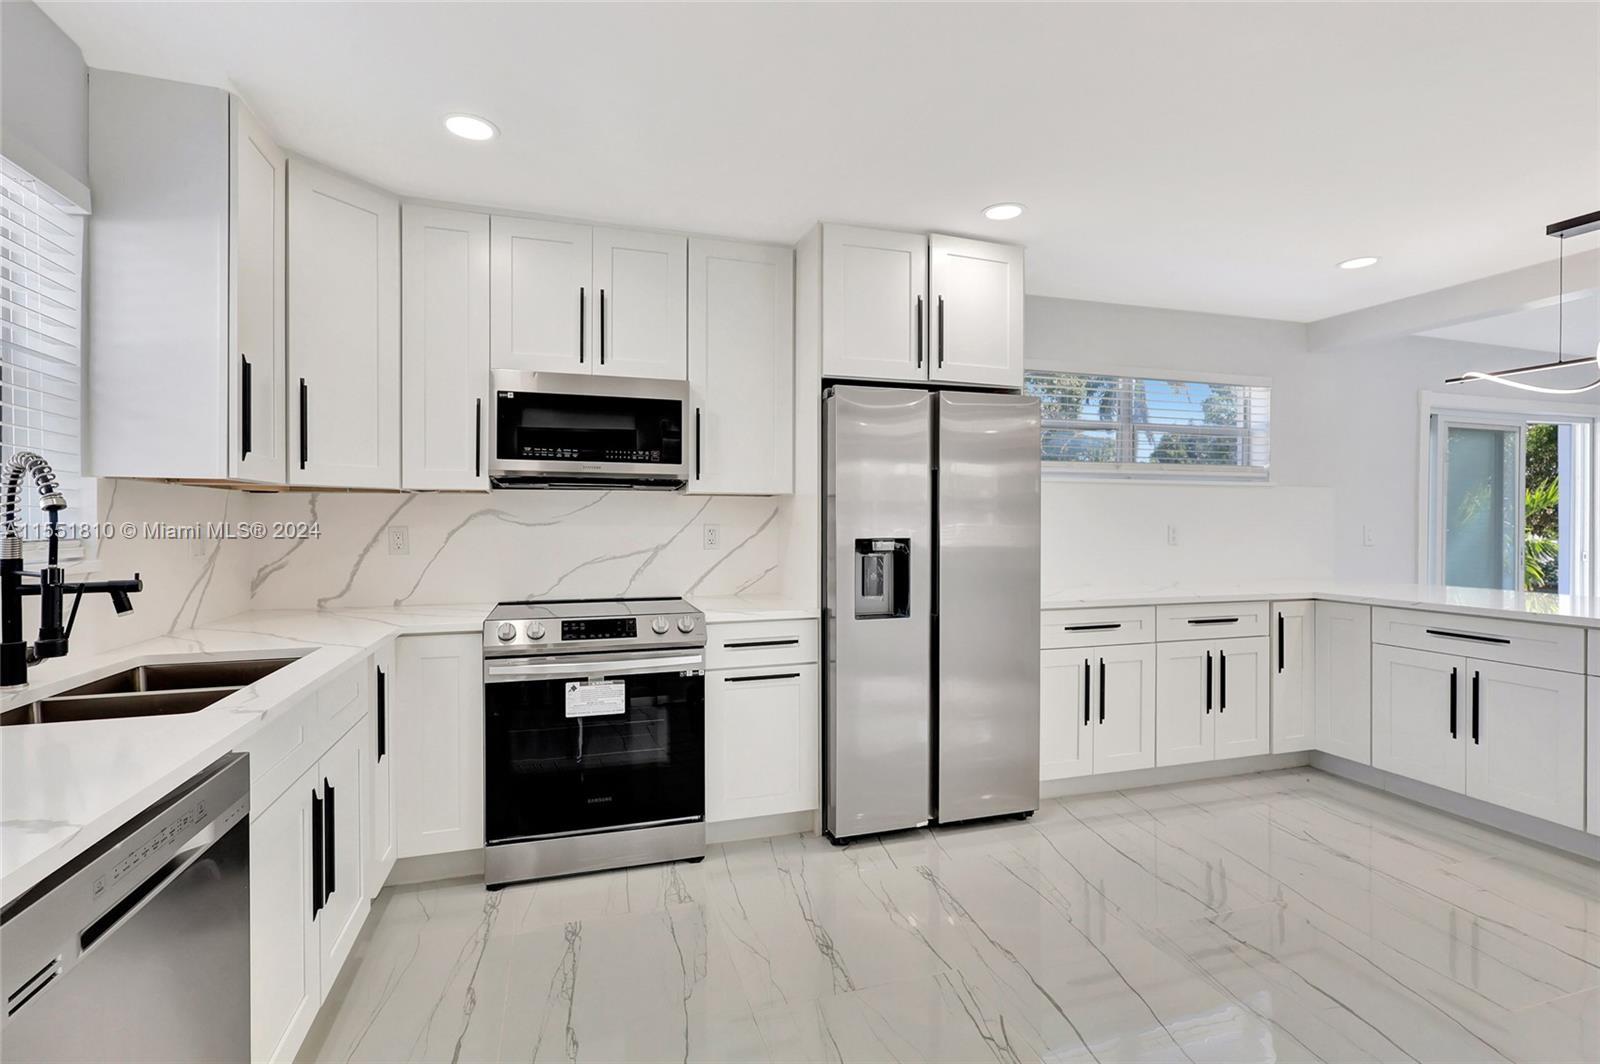 Newly renovated and move-in ready, this stunning 3 bedroom home offers more than meets the eye. With